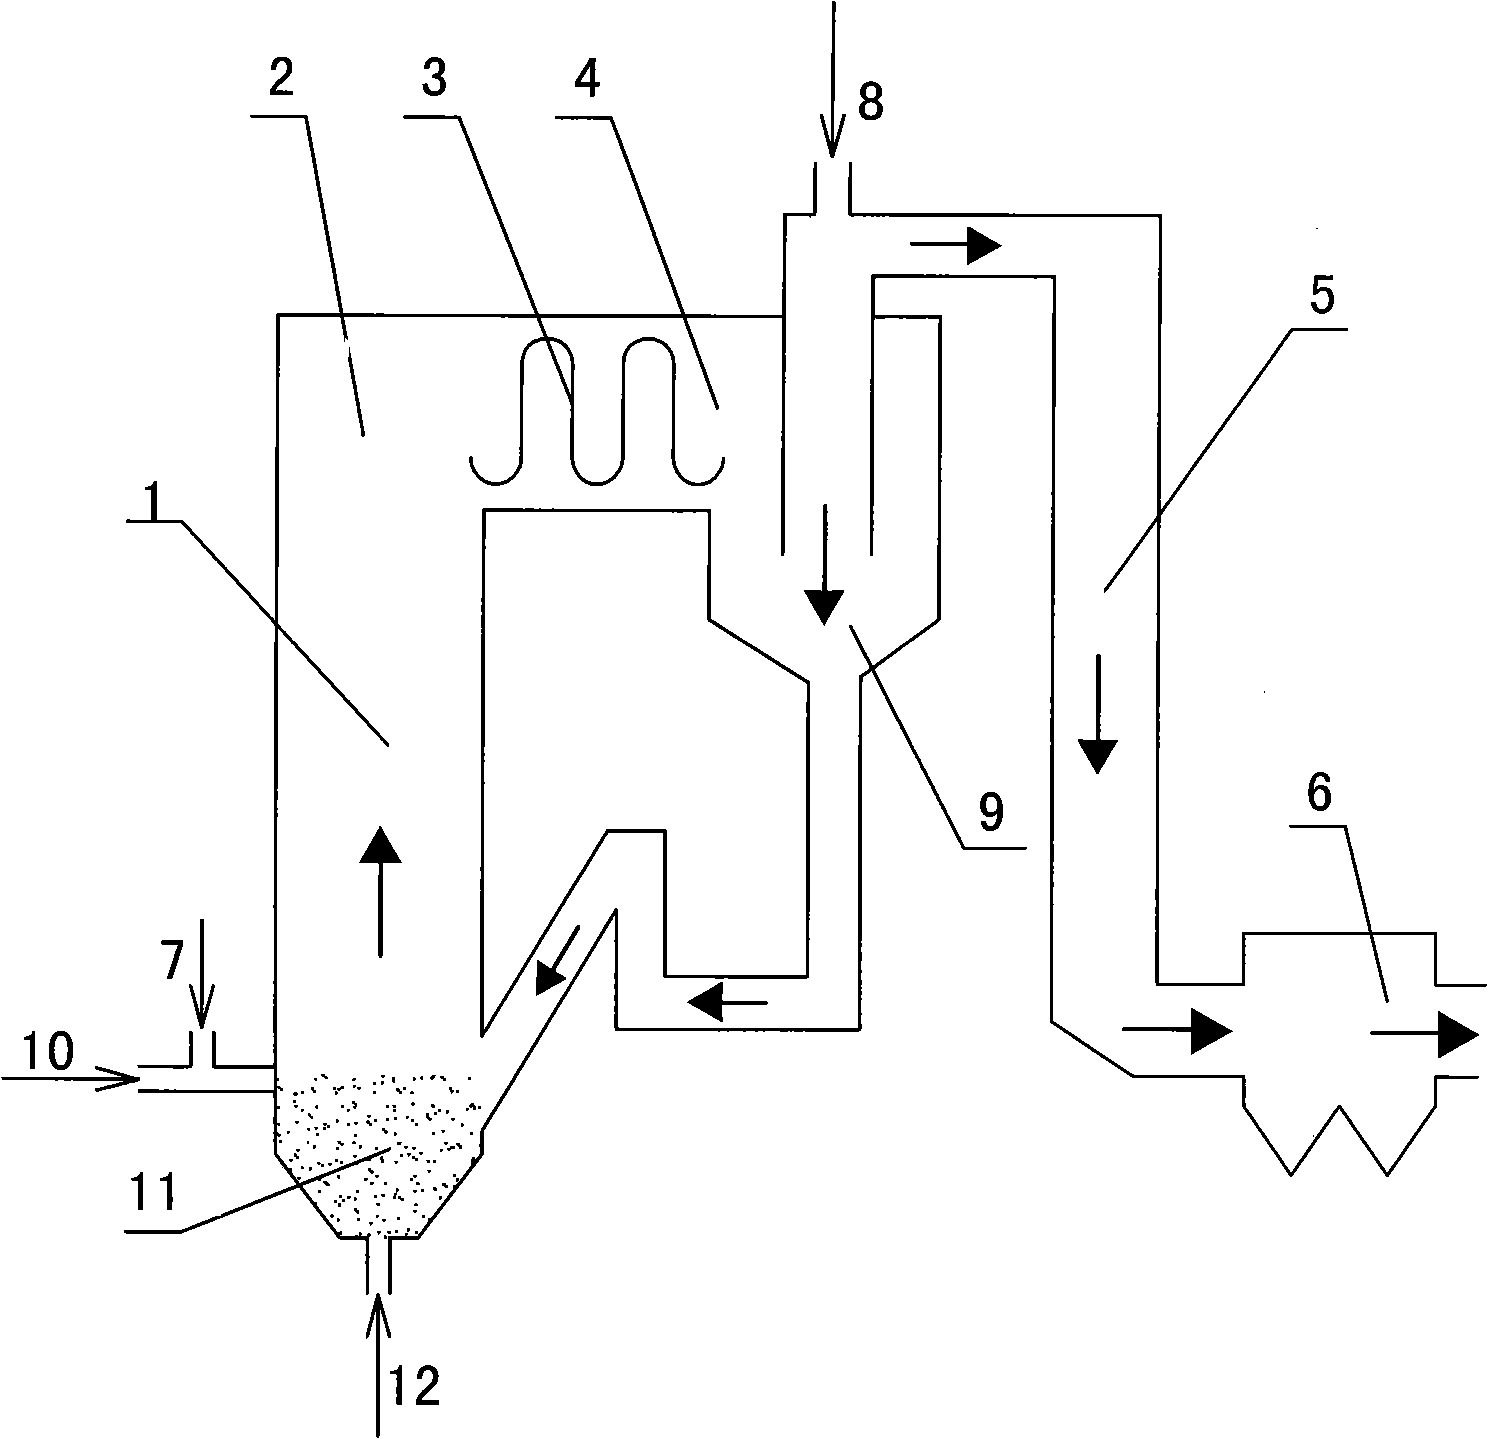 Circulating fluid bed boiler flue calcium injection and desulfurization process